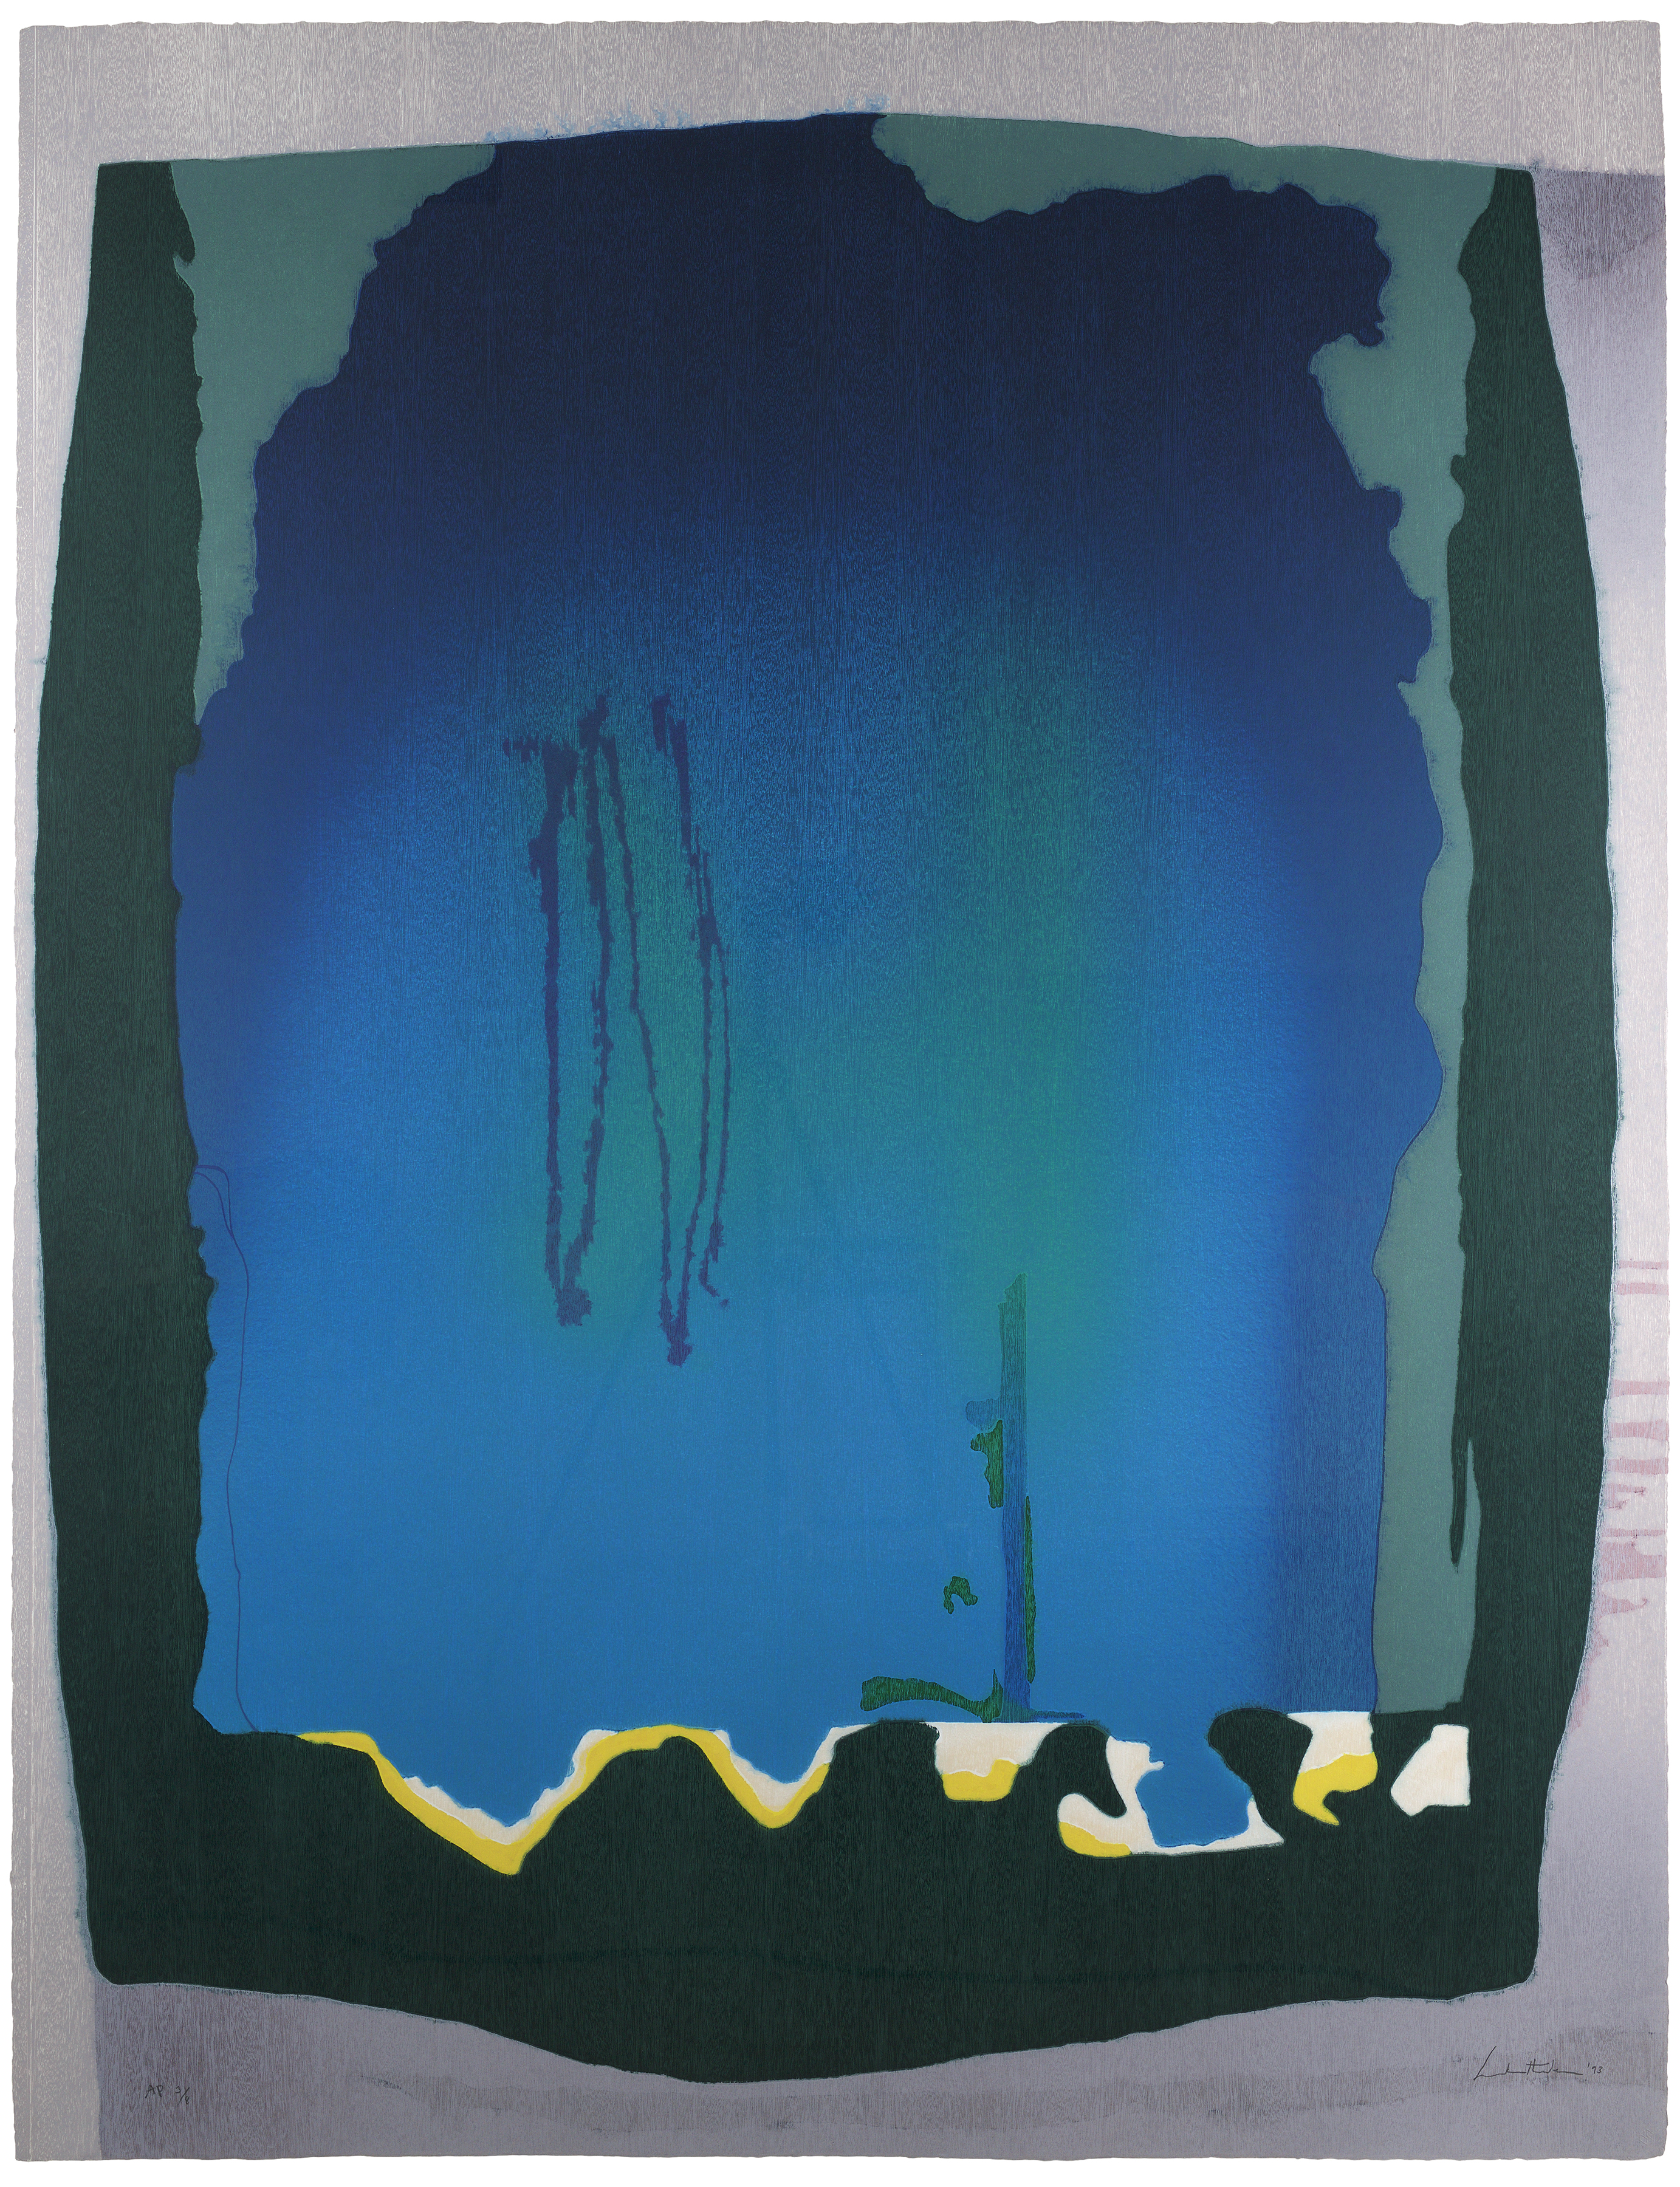 Freefall by Helen Frankenthaler - 1993 - 199.4 x 153.7 cm Dulwich Picture Gallery